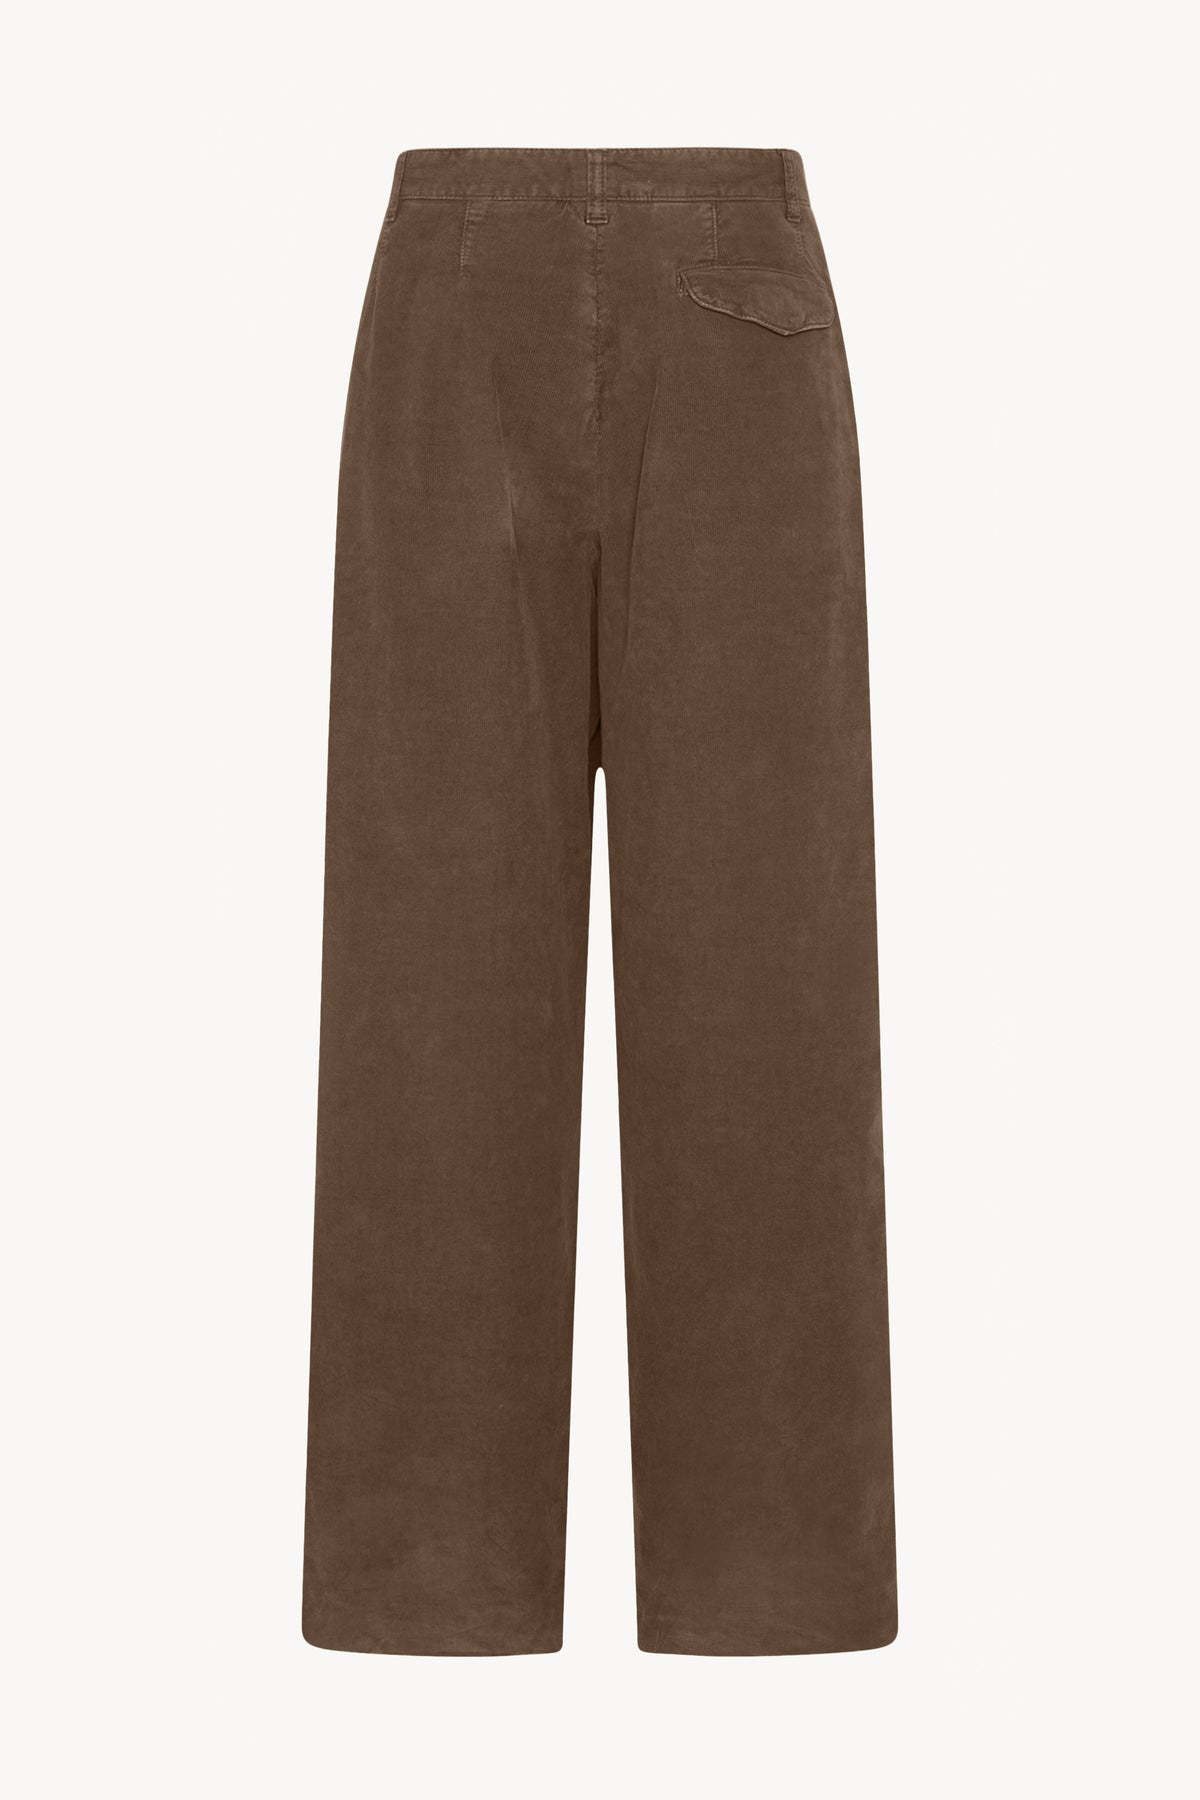 Rufos Pant in Cotton